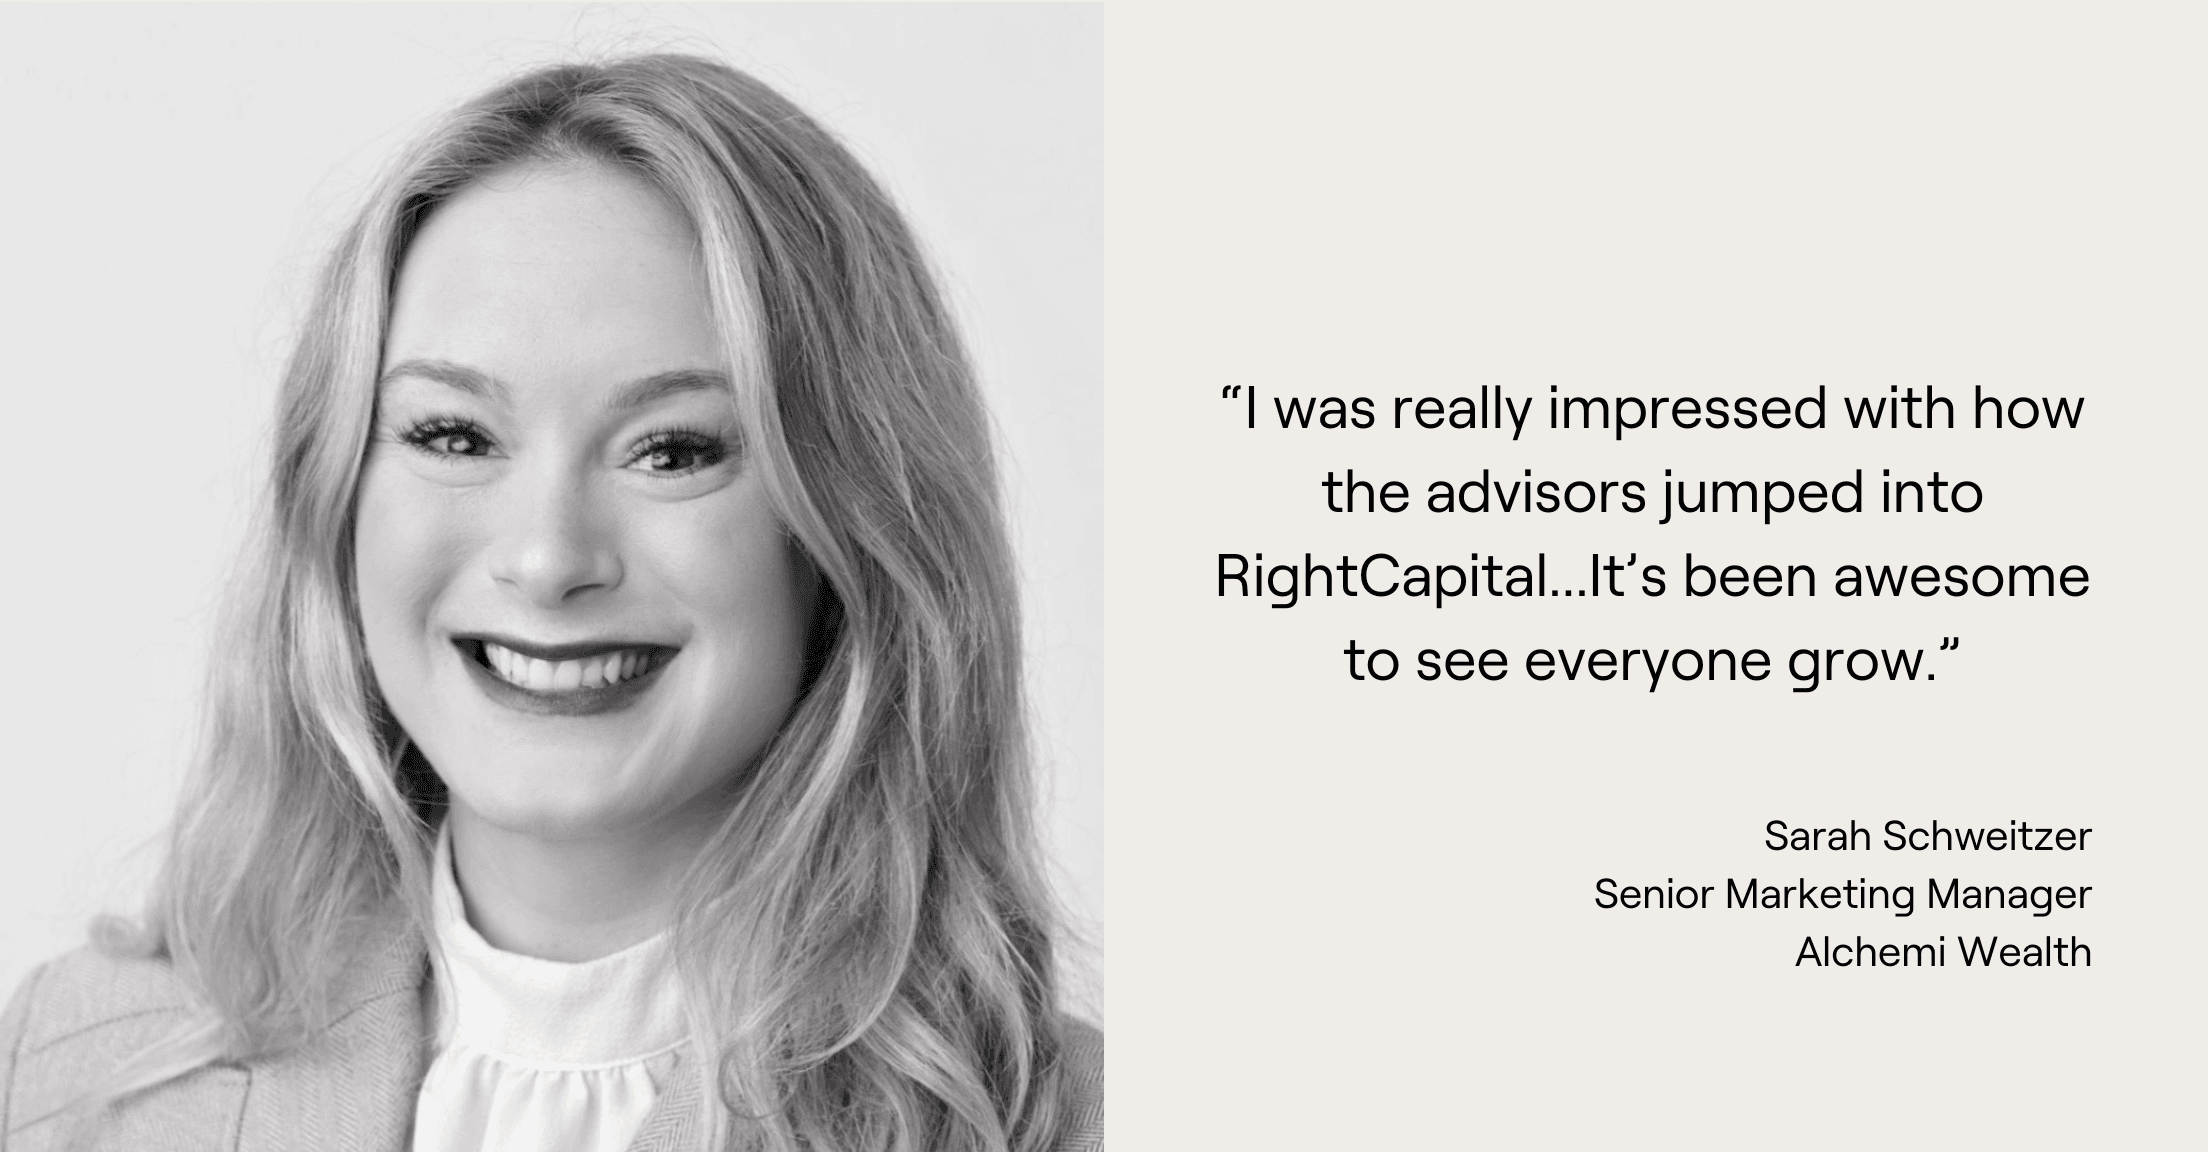 Headshot of Sarah Schweitzer of Alchemi Wealth and quote, "I was really impressed with how the advisors jumped into RightCapital...It's been awesome to see everyone grow."